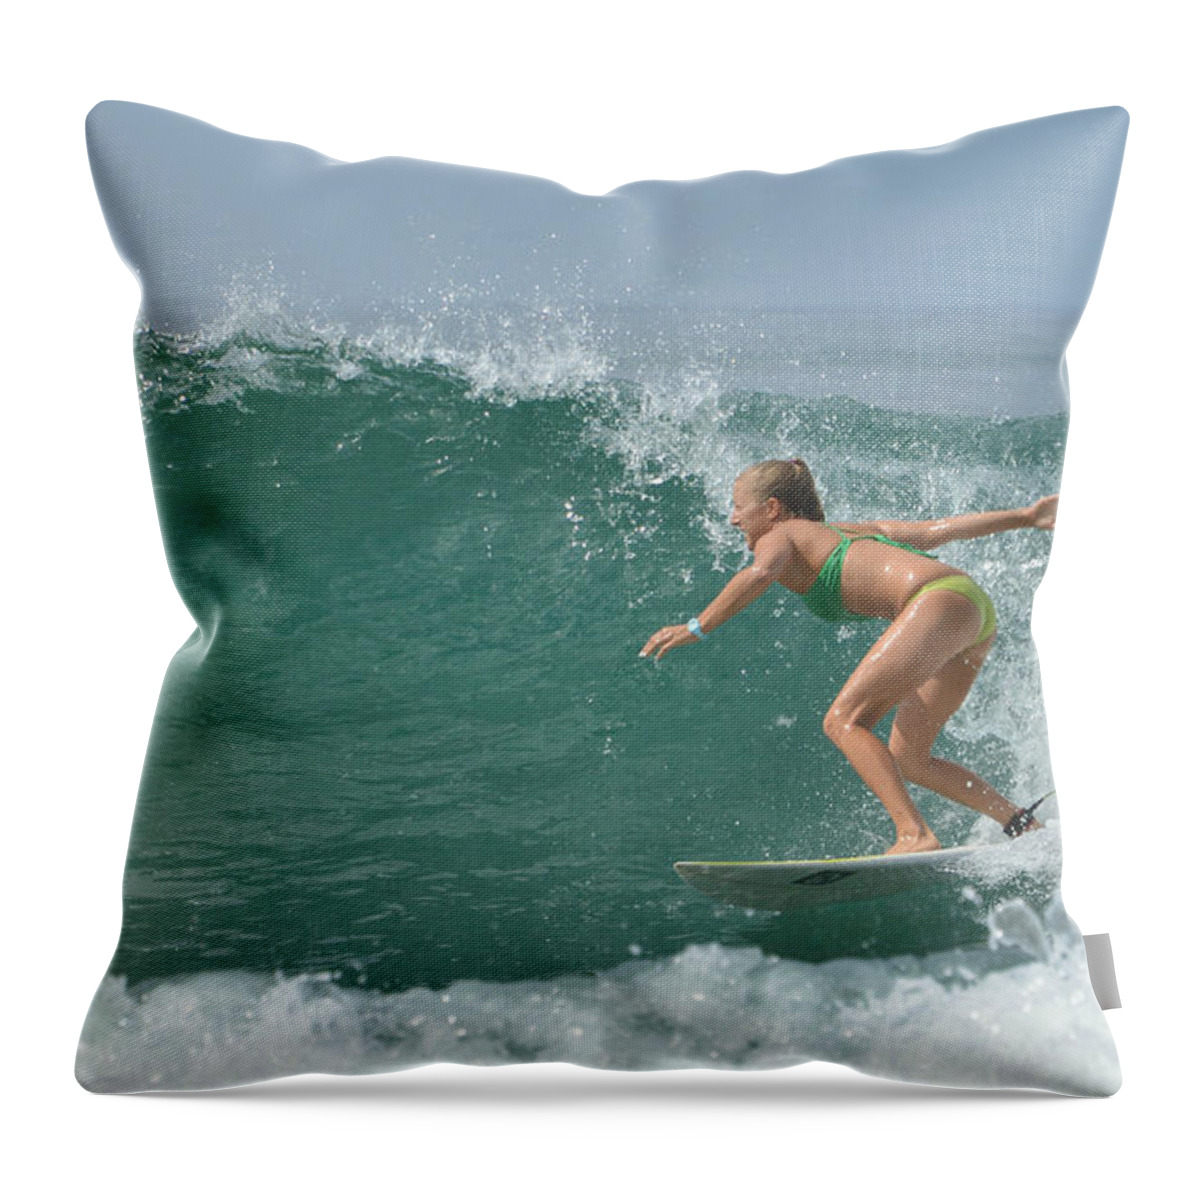 Surfer Throw Pillow featuring the photograph Riding It In 3 by Fraida Gutovich